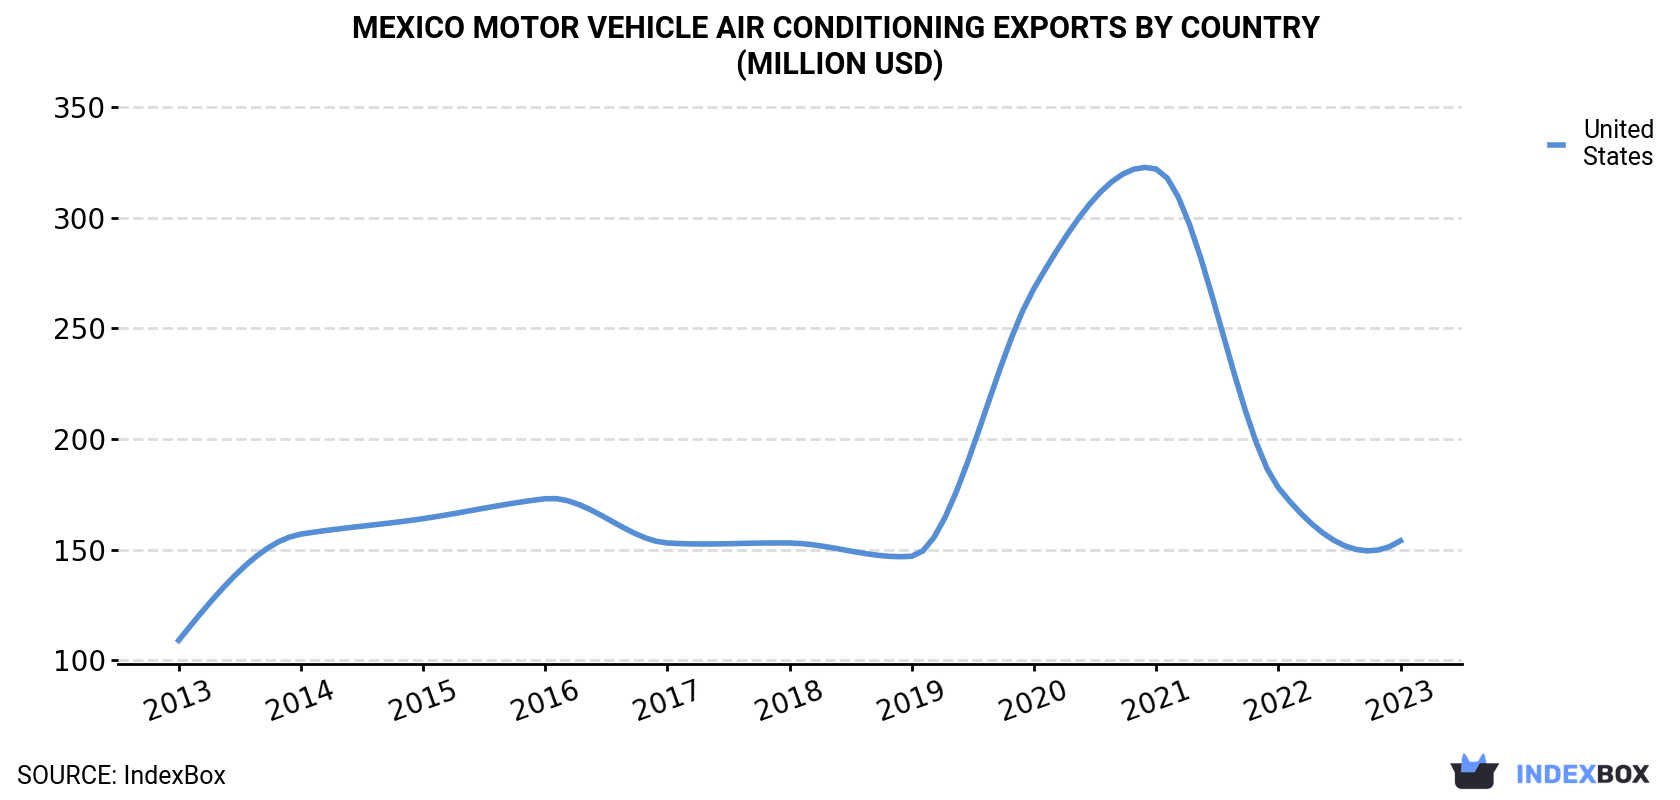 Mexico Motor Vehicle Air Conditioning Exports By Country (Million USD)